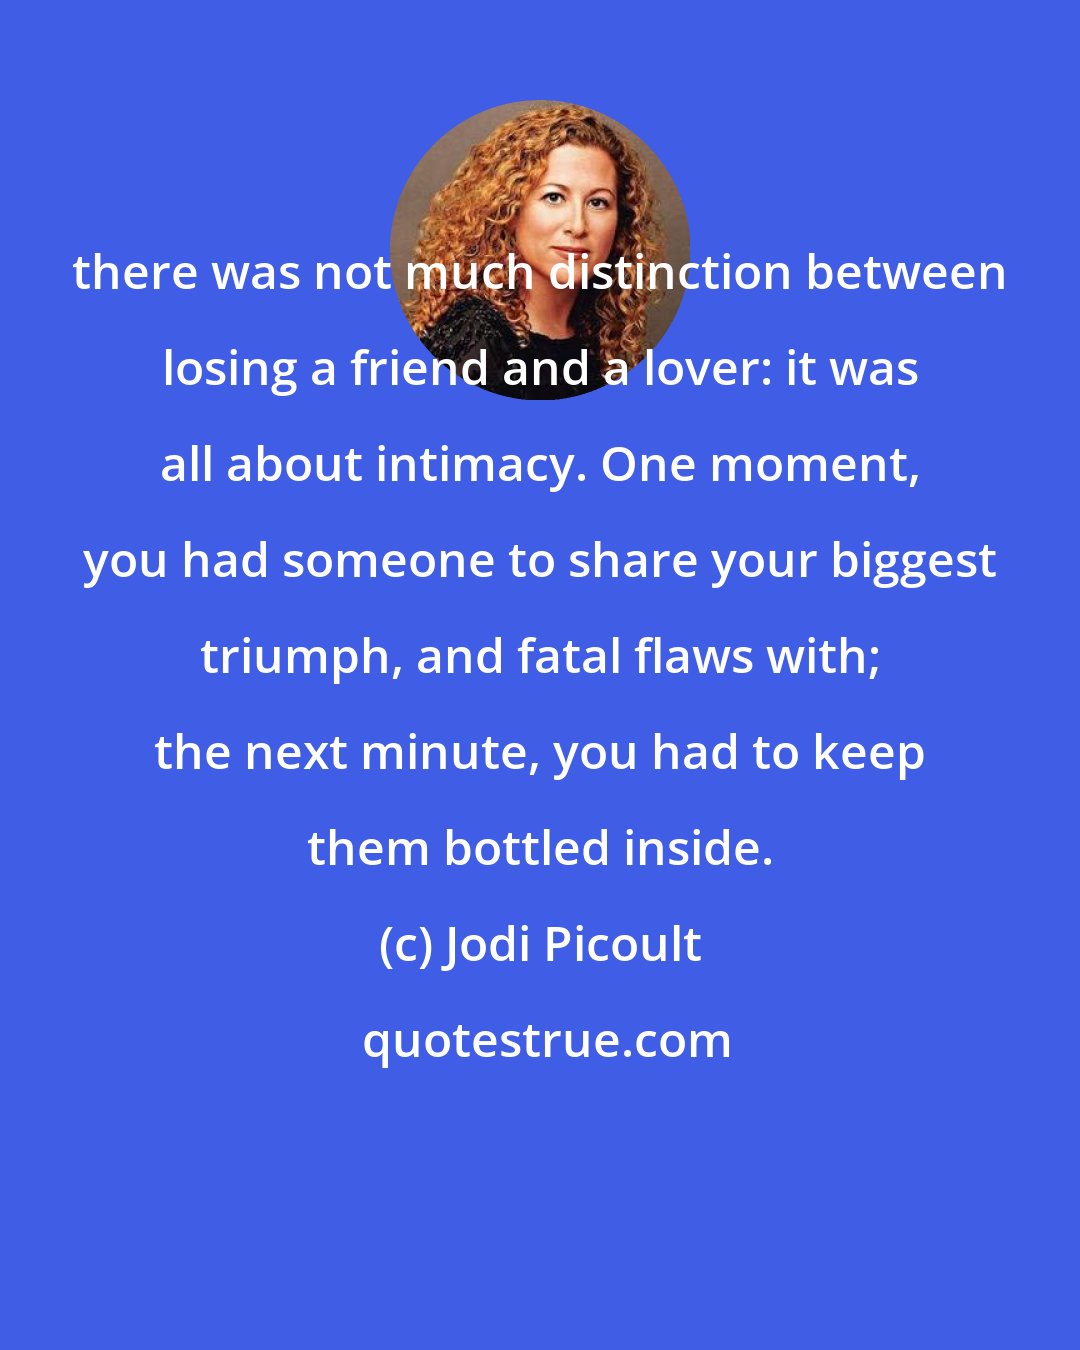 Jodi Picoult: there was not much distinction between losing a friend and a lover: it was all about intimacy. One moment, you had someone to share your biggest triumph, and fatal flaws with; the next minute, you had to keep them bottled inside.